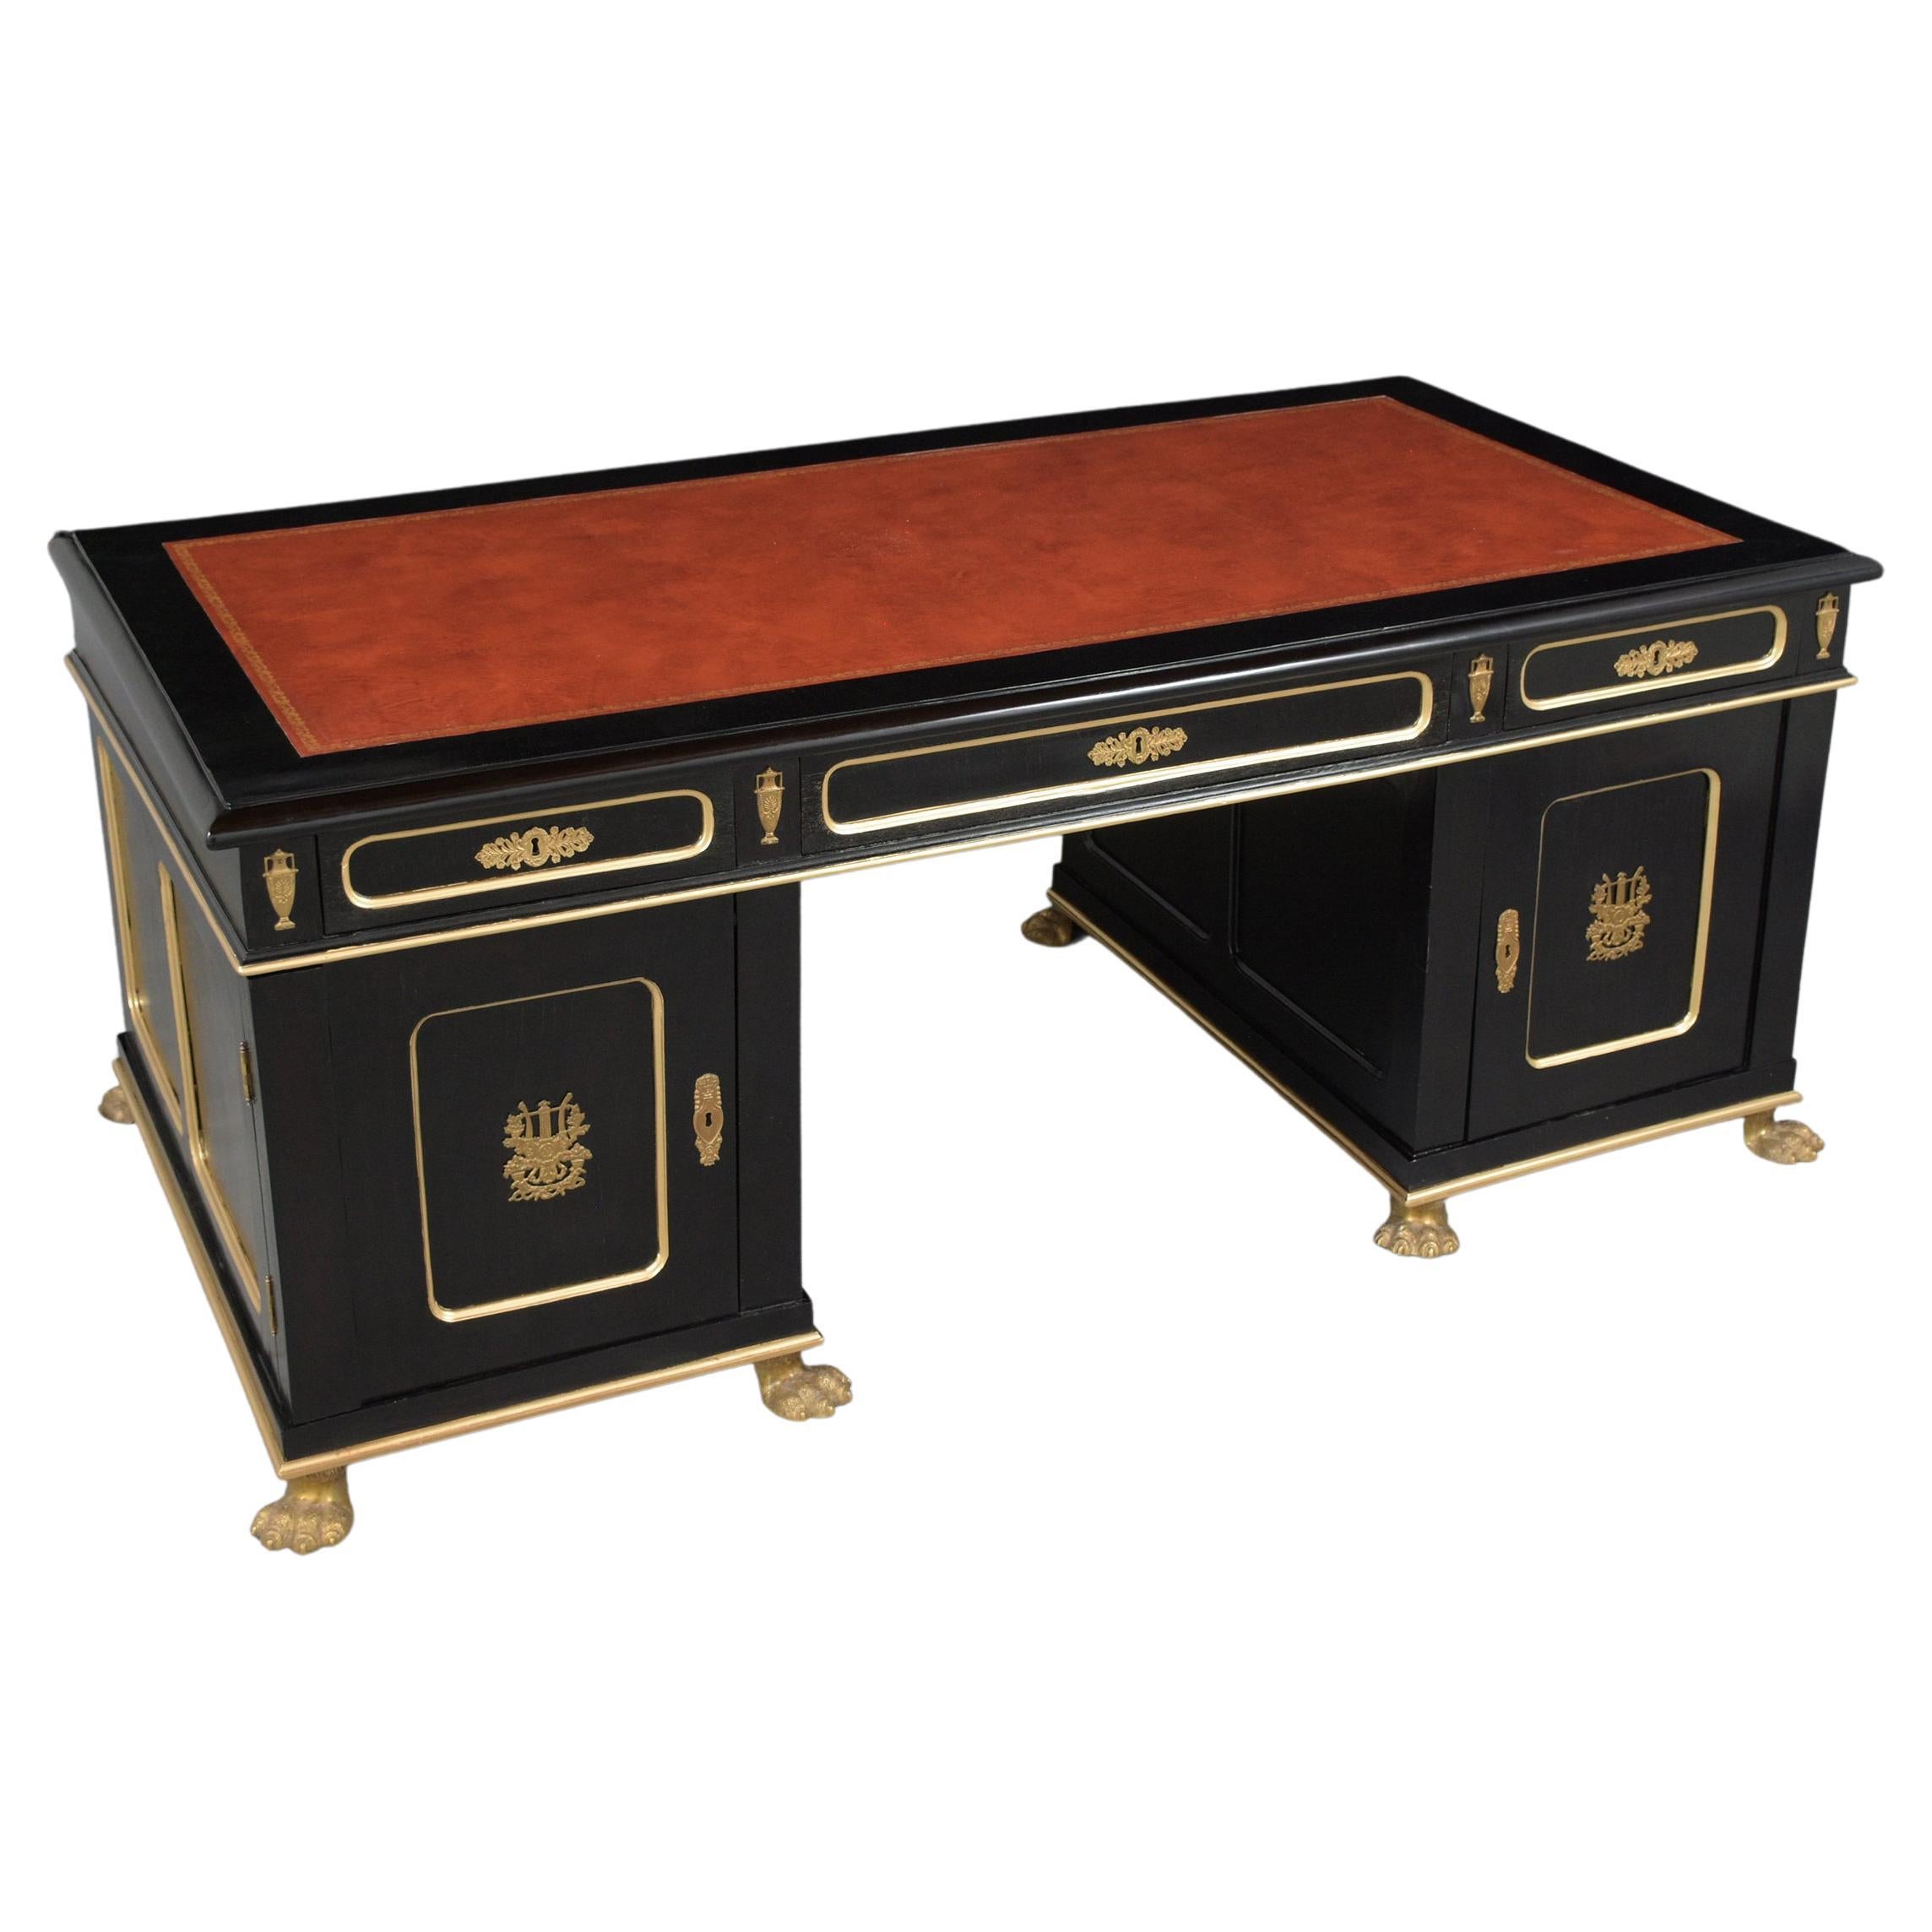 An extraordinary antique empire partners desk in excellent condition is handcrafted out of mahogany wood and has been completely restored by our professional craftsmen team. This executive desk is eye-catching and features beautiful brass ornaments